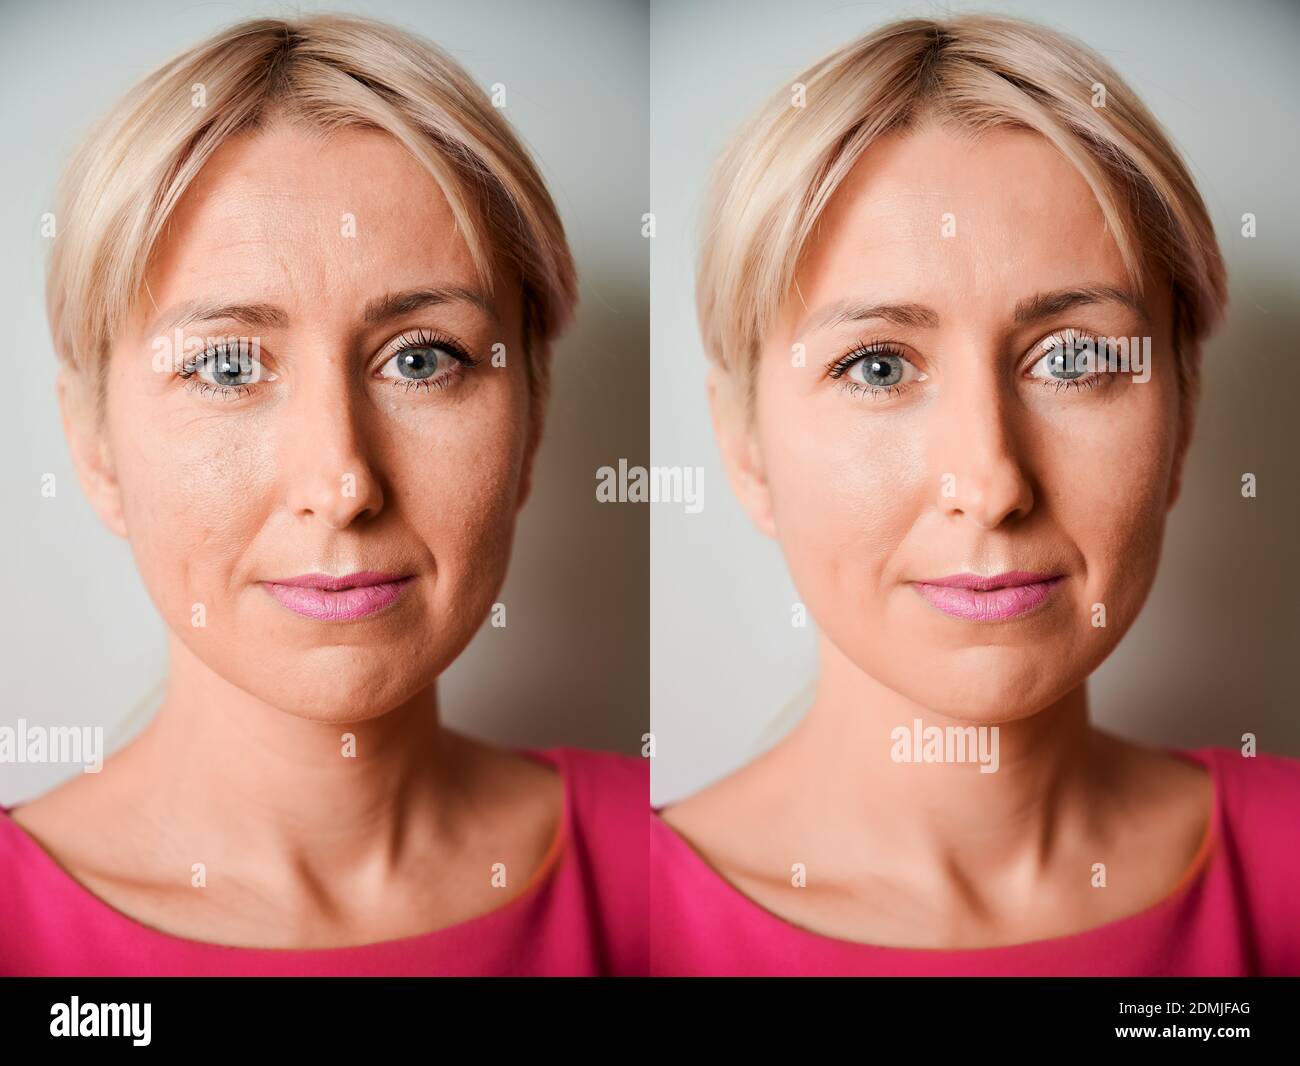 Set of two portraits of the same woman, one before and other after treatment Stock Photo